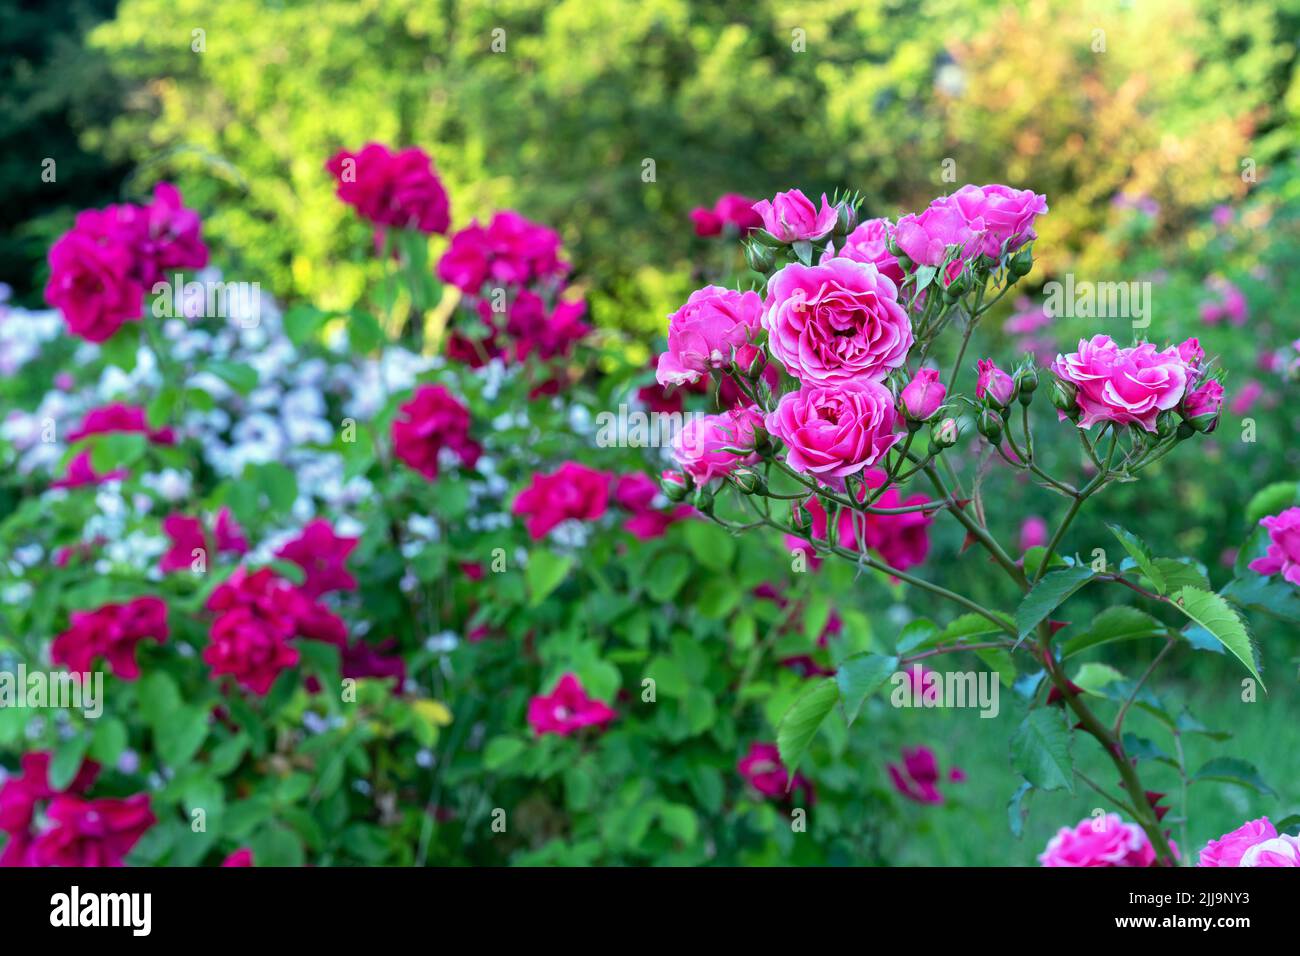 Pink roses with a white border bloom in the summer in the rose garden. Stock Photo